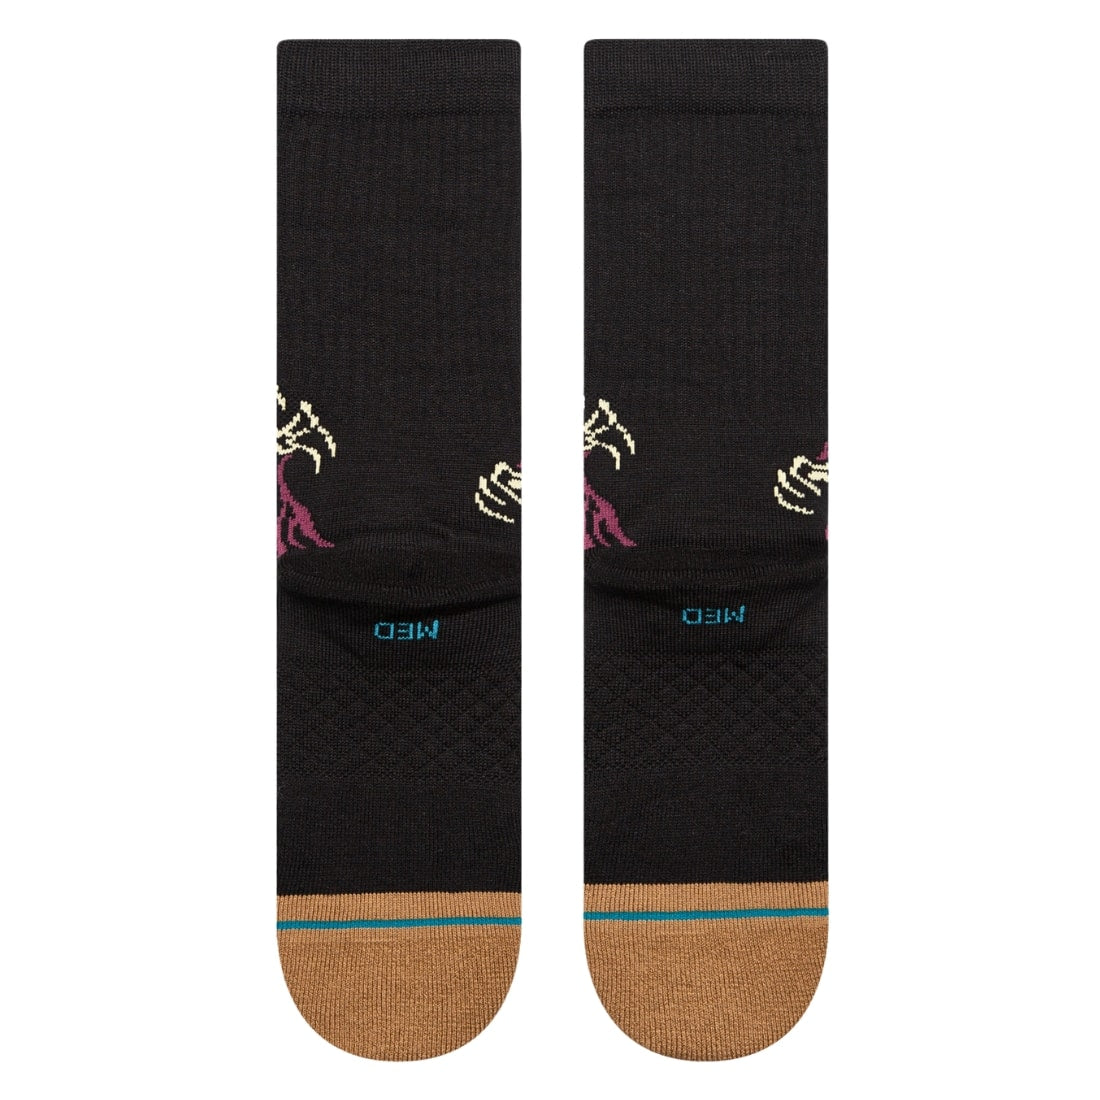 Stance X Welcome Skelly Crew Infiknit Socks - Black - Unisex Crew Length Socks by Stance